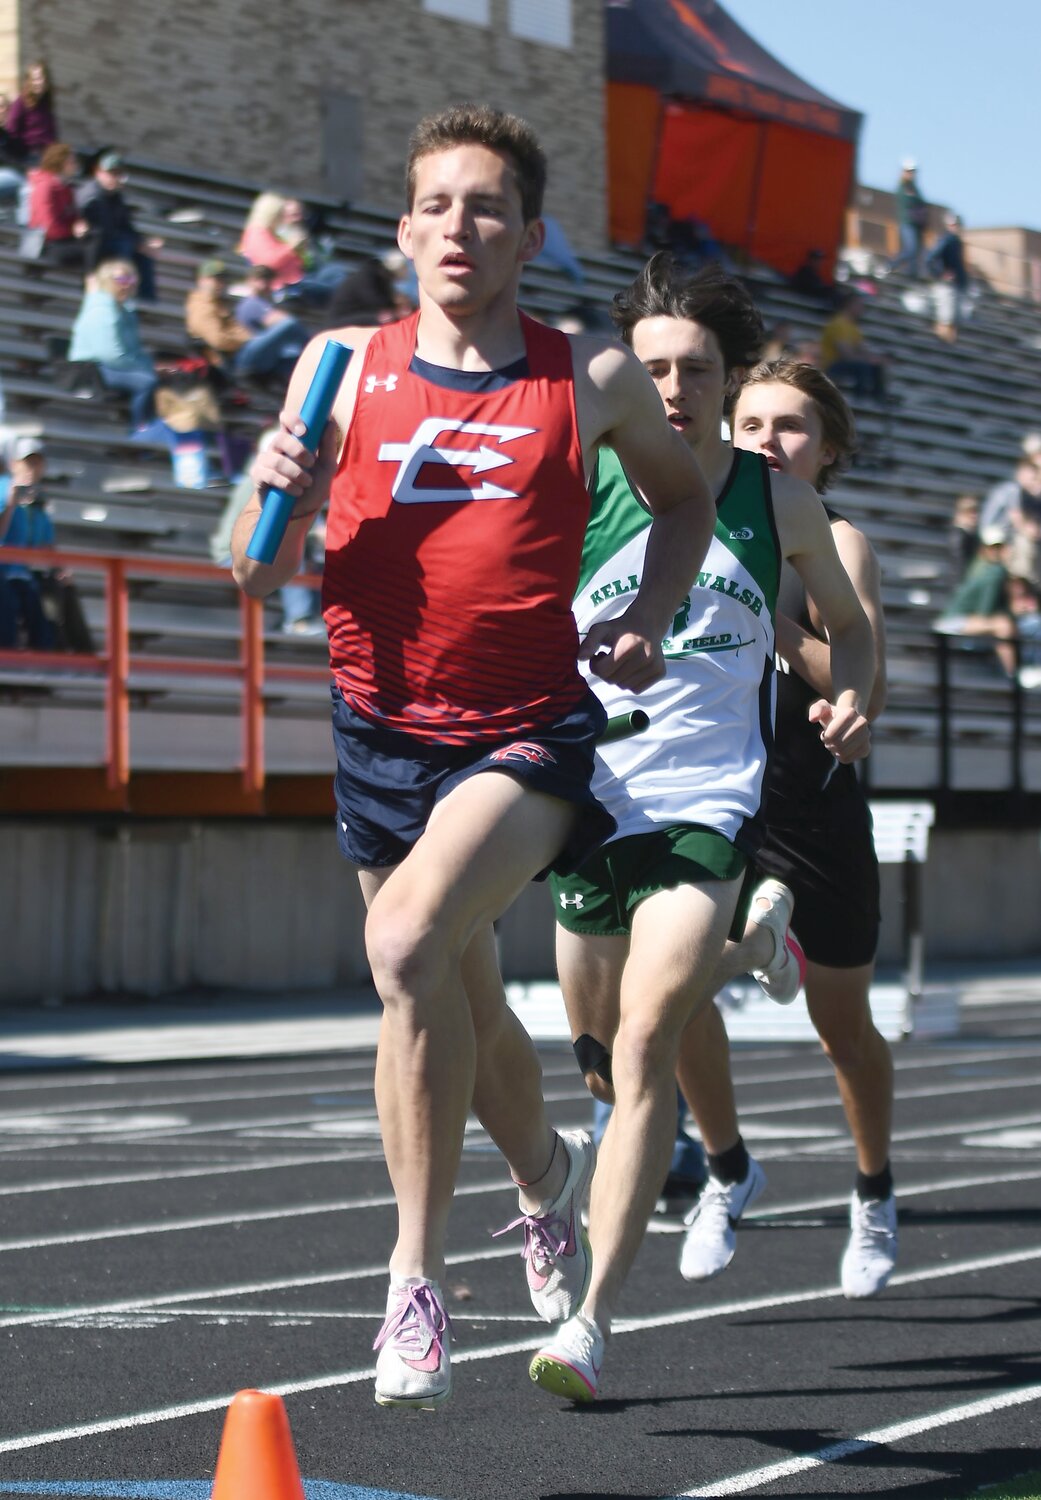 Gideon Stahl runs the first leg of the record-breaking 4x800 relay Saturday at the 4A West Regional Meet in Rock Springs.